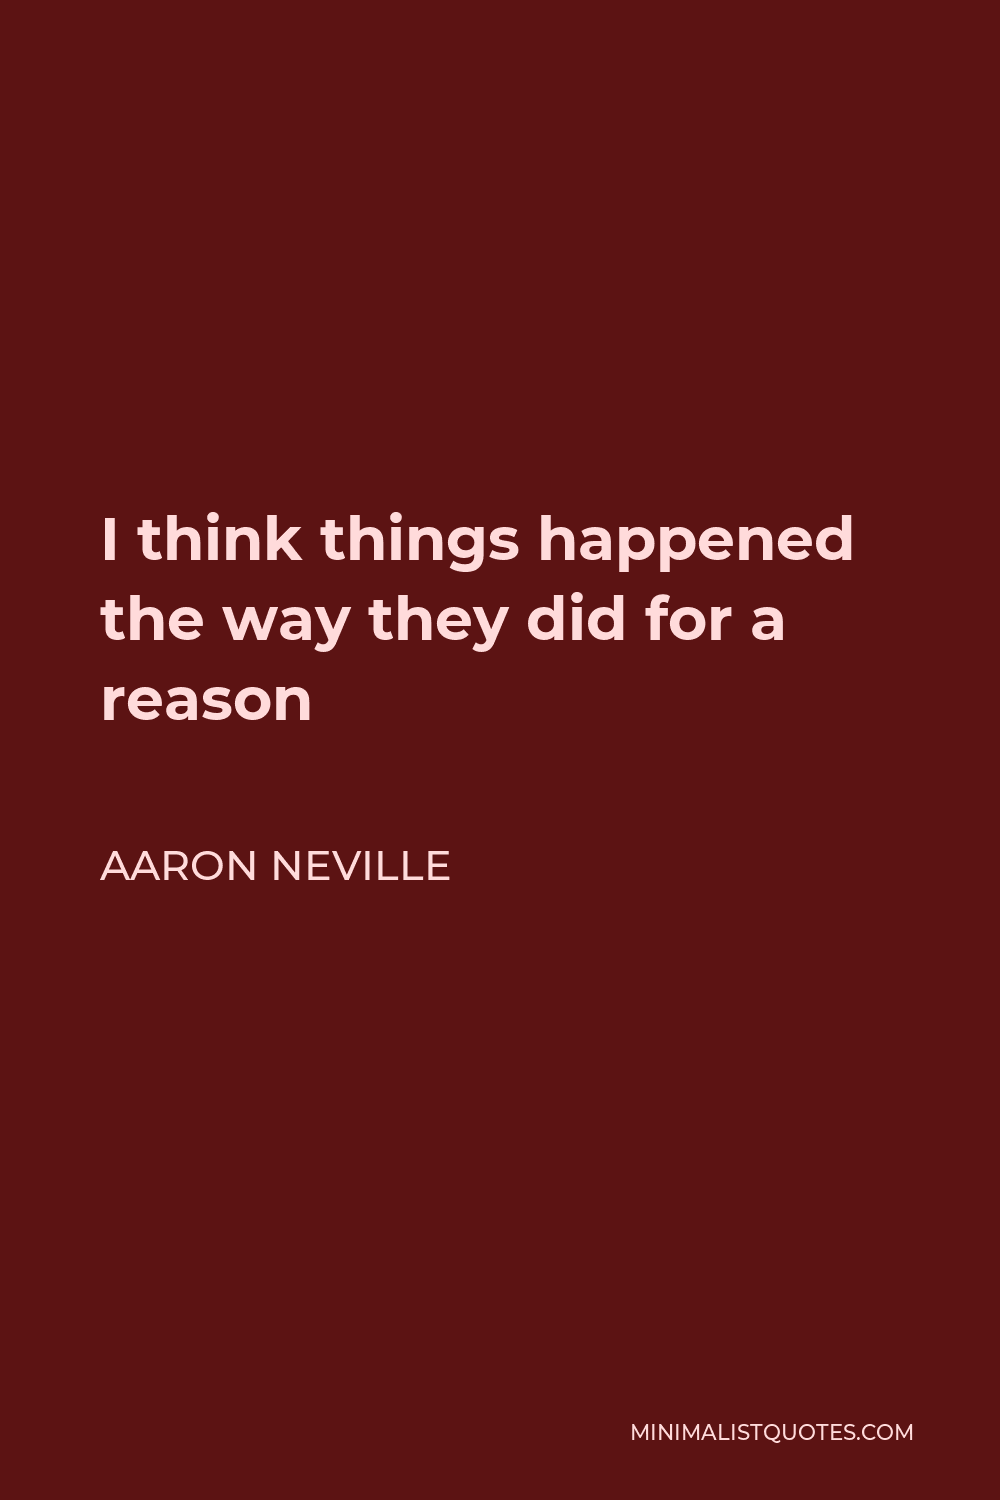 Aaron Neville Quote - I think things happened the way they did for a reason